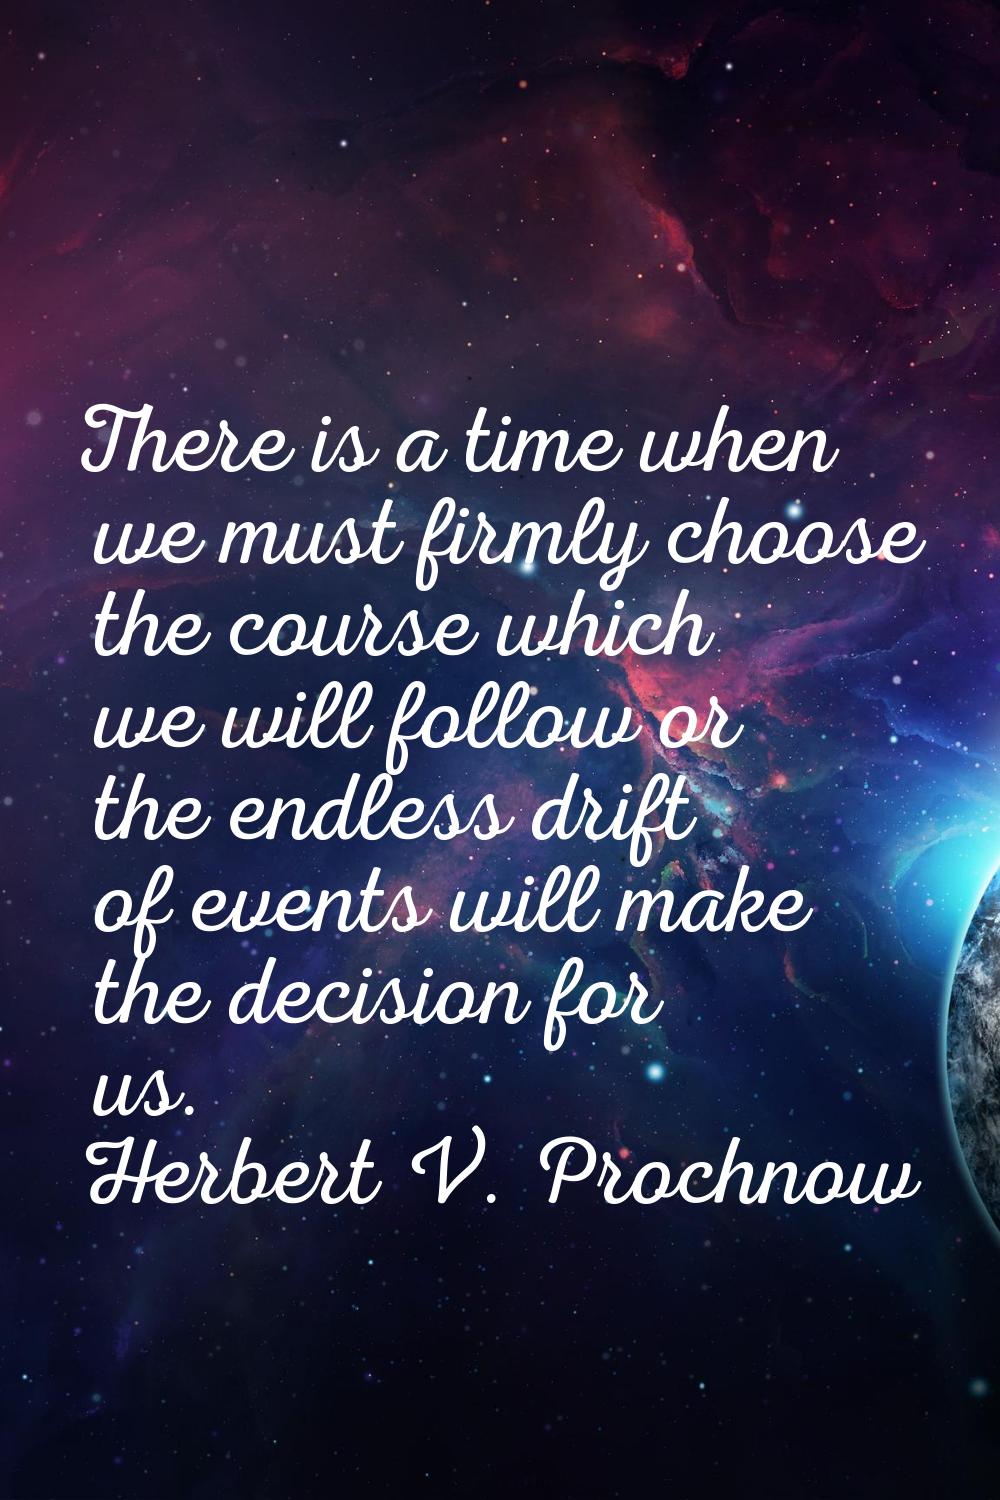 There is a time when we must firmly choose the course which we will follow or the endless drift of 